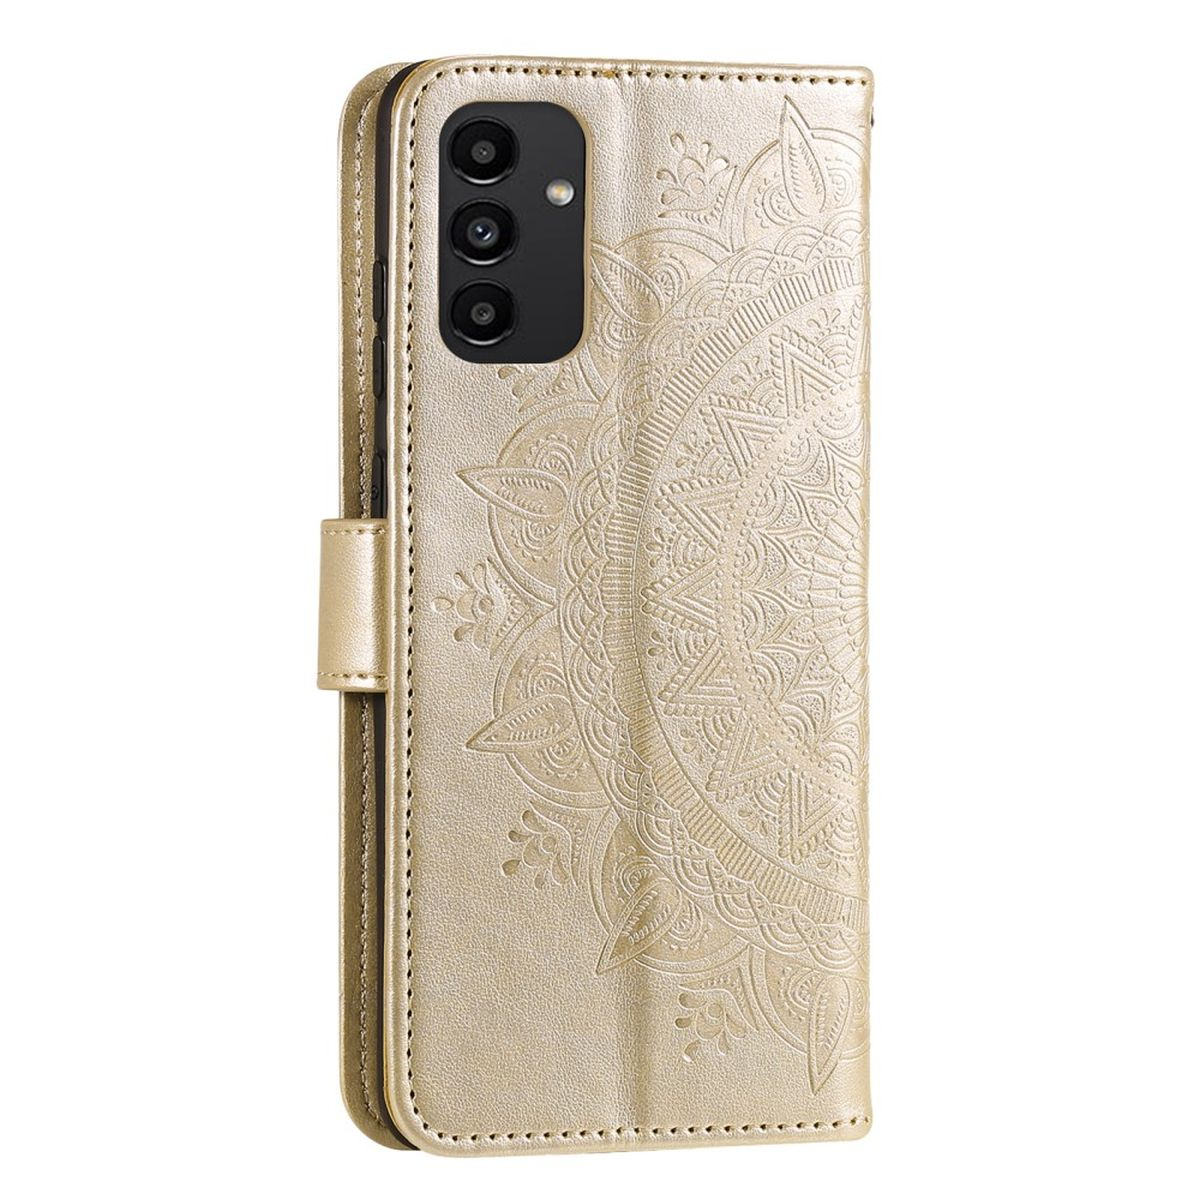 COVERKINGZ Klapphülle Samsung, Mandala Gold A13 Galaxy Bookcover, mit Muster, 4G